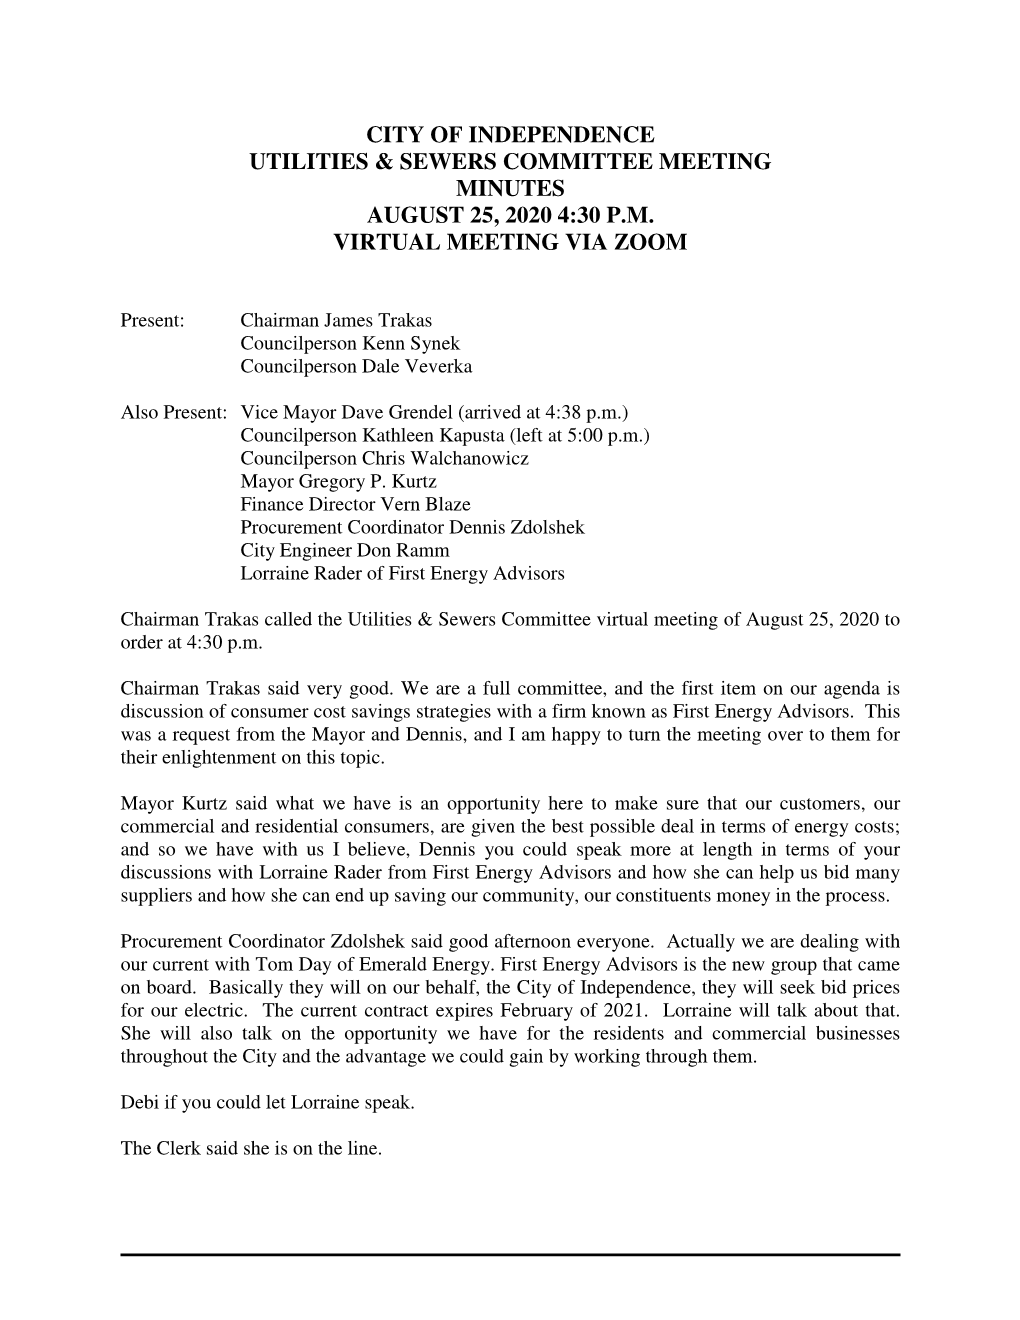 City of Independence Utilities & Sewers Committee Meeting